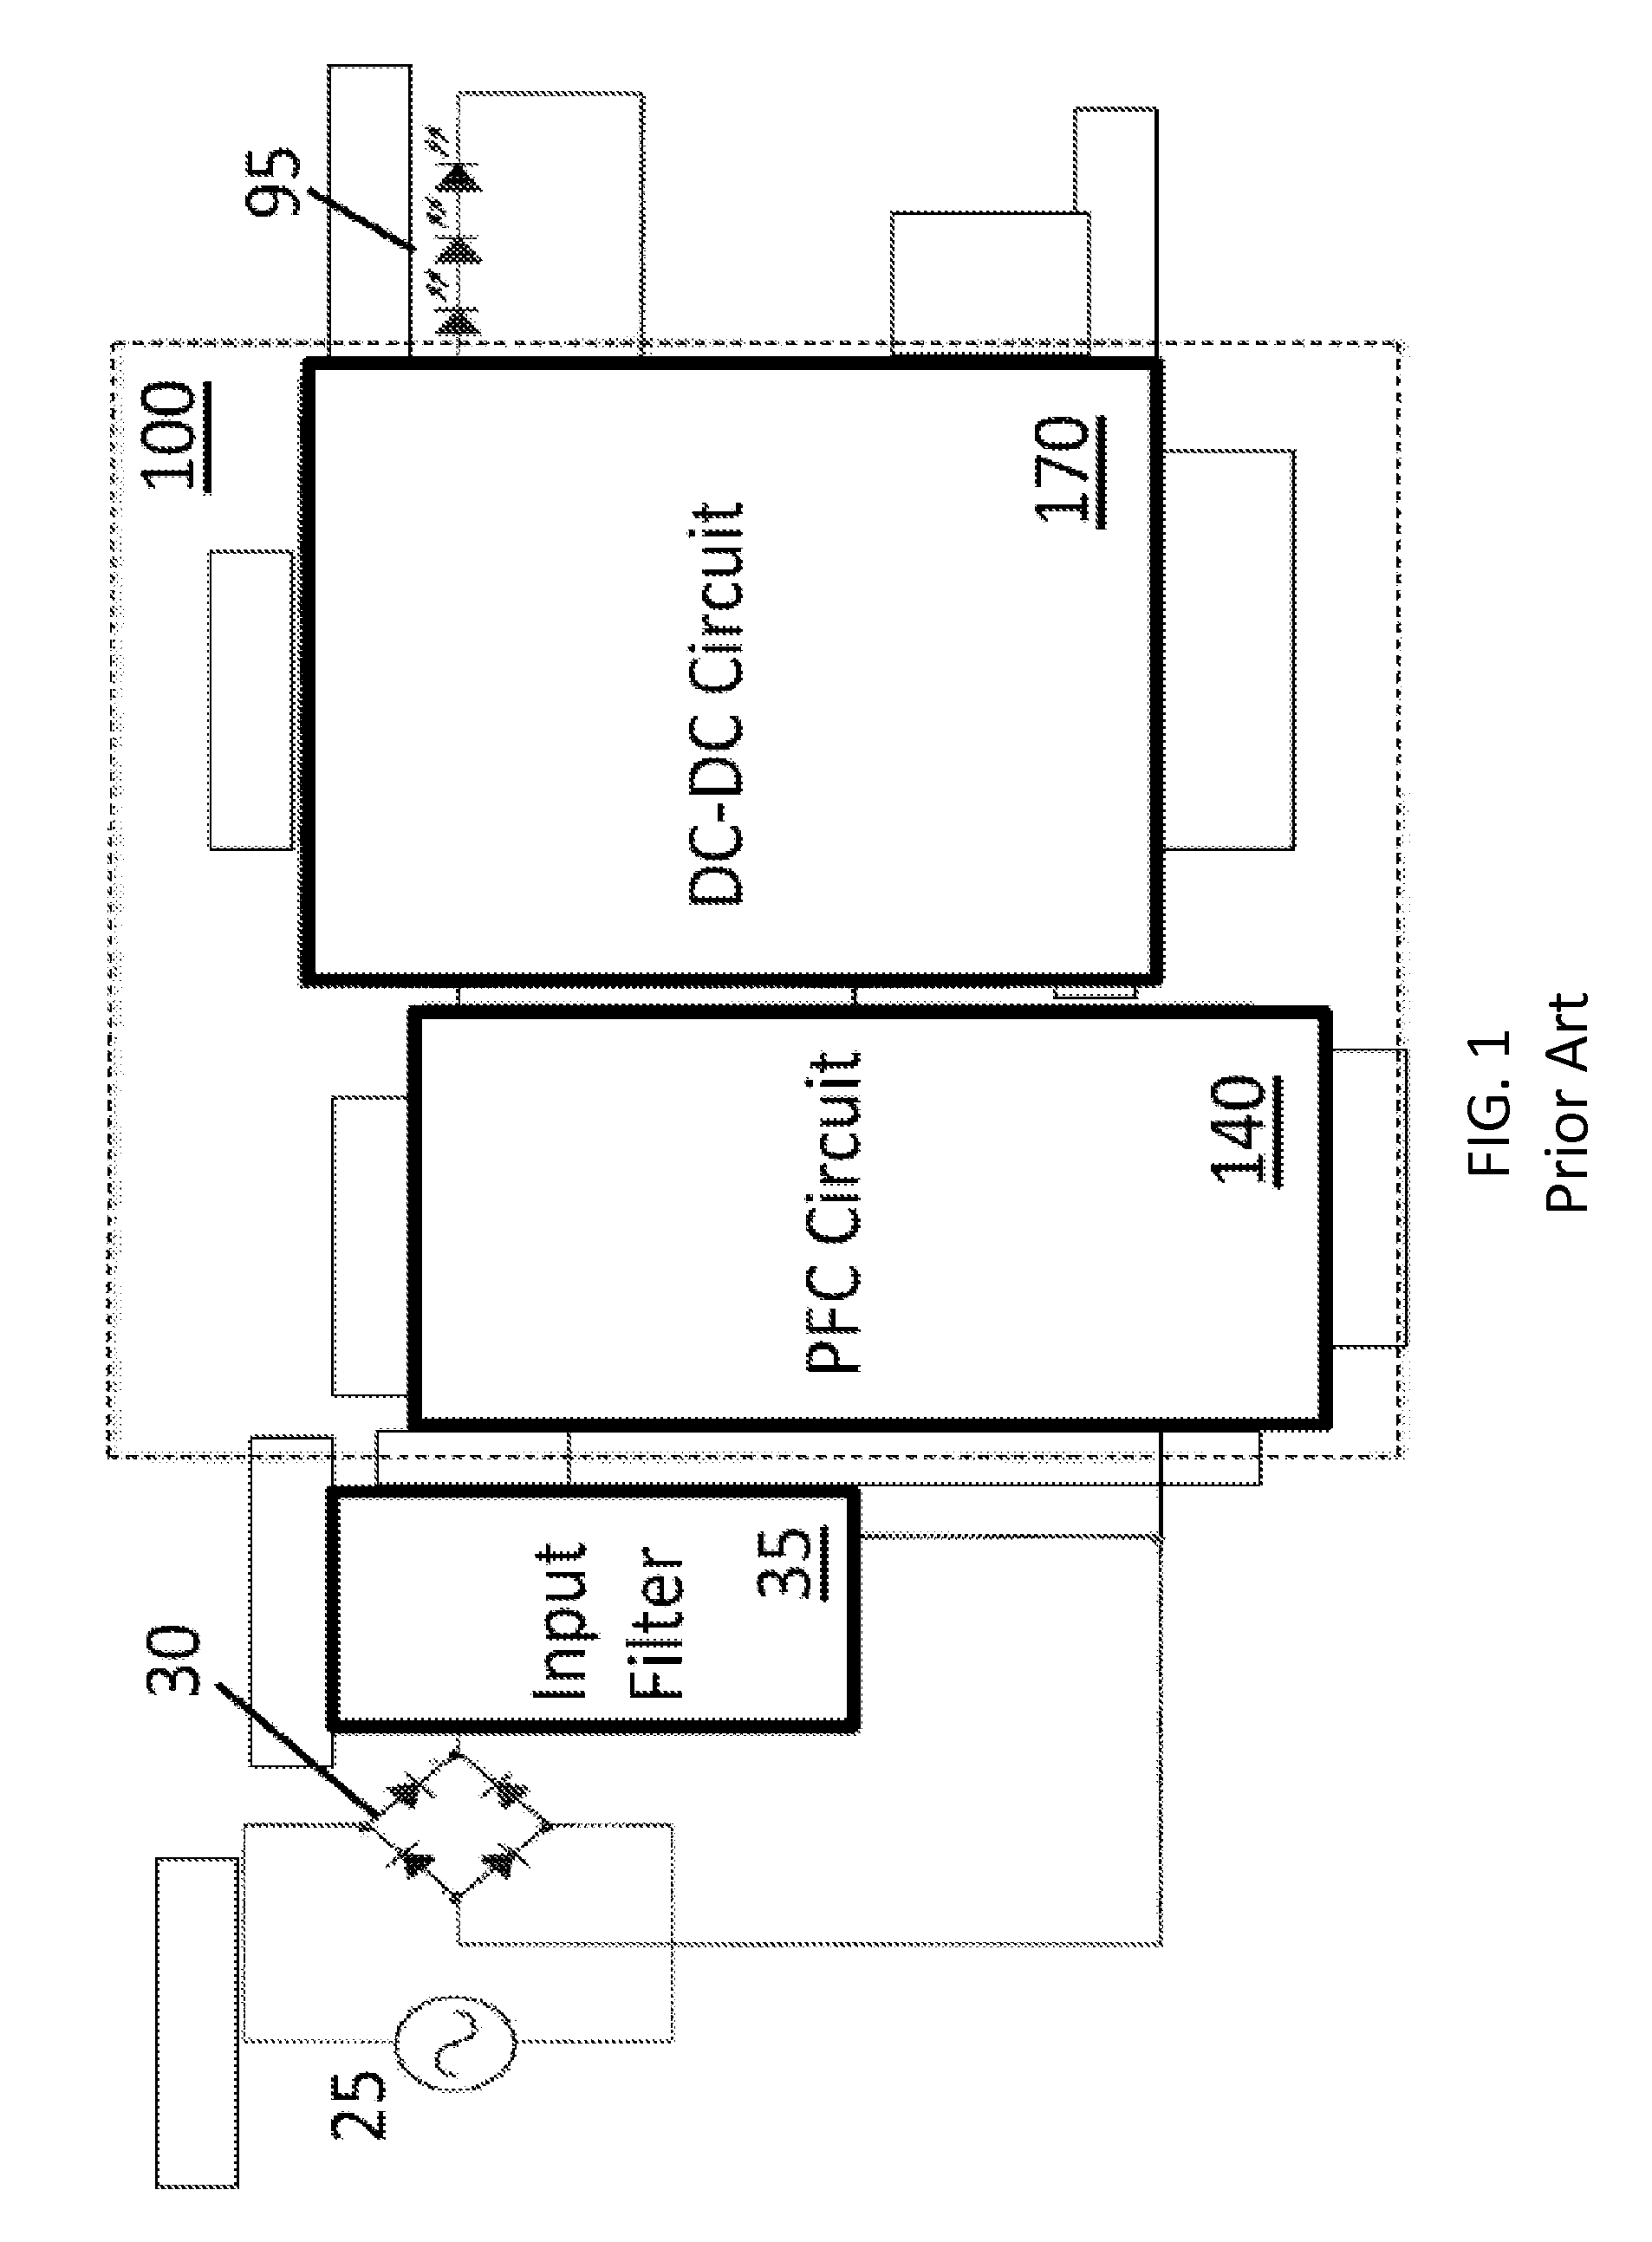 Single stage AC-DC power converter with flyback PFC and improved THD